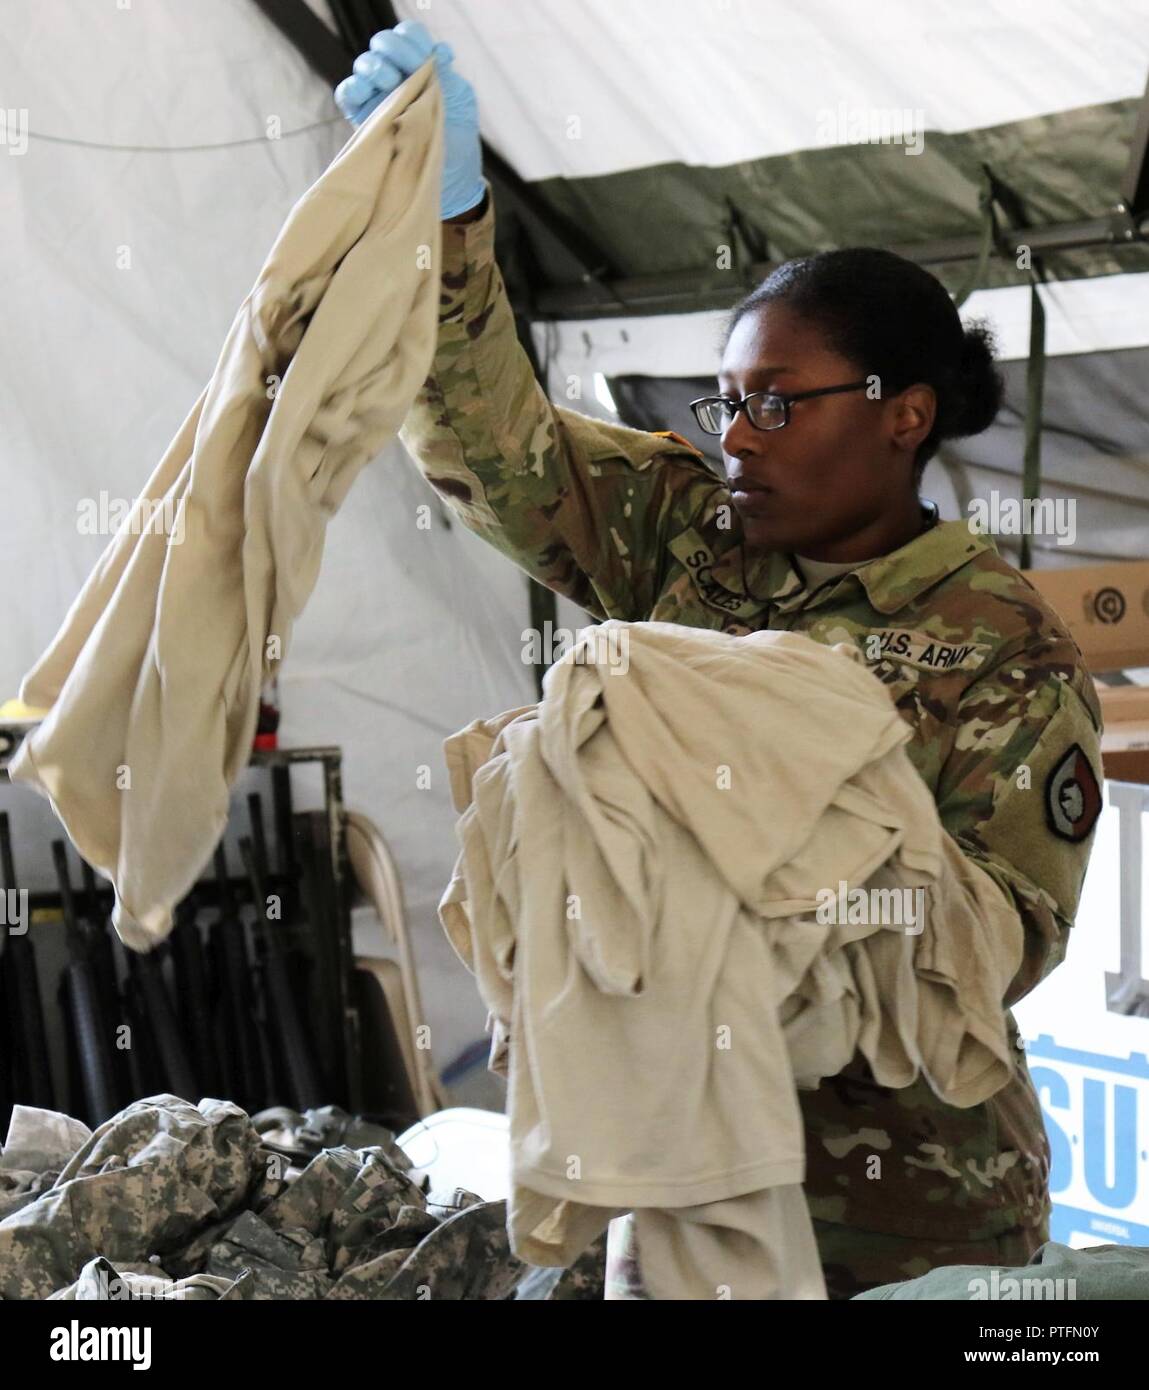 U.S. Army Reserve Pvt. 1st Class Sondra Scales, a utilities equipment repairer with the 340th Quartermaster Company, sorts laundry during the two-week 2017 Quartermaster Liquid Logistics Exercise at Joint Base Lewis McChord, WA, Jul. 14 to 27, 2017.  QLLEX allows U.S. Army Reserve units to demonstrate their skills and provide real-world fuel and water support while training at the tactical, operational, and strategic level. Stock Photo